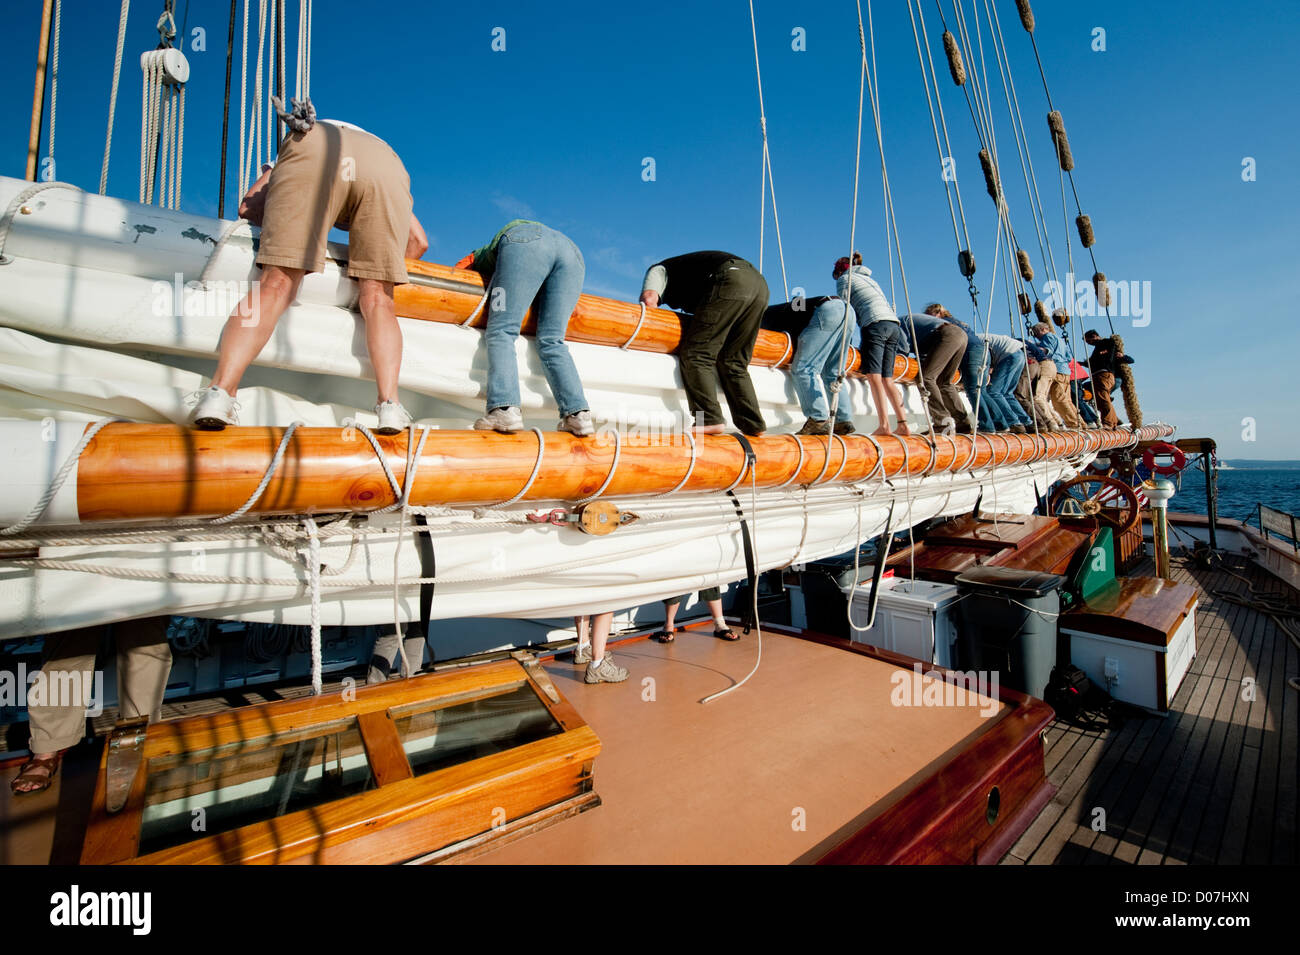 Crew members aboard the historic schooner 'Zodiac' put away the sails after a sailboat race in Port Townsend, Washington, USA. Stock Photo